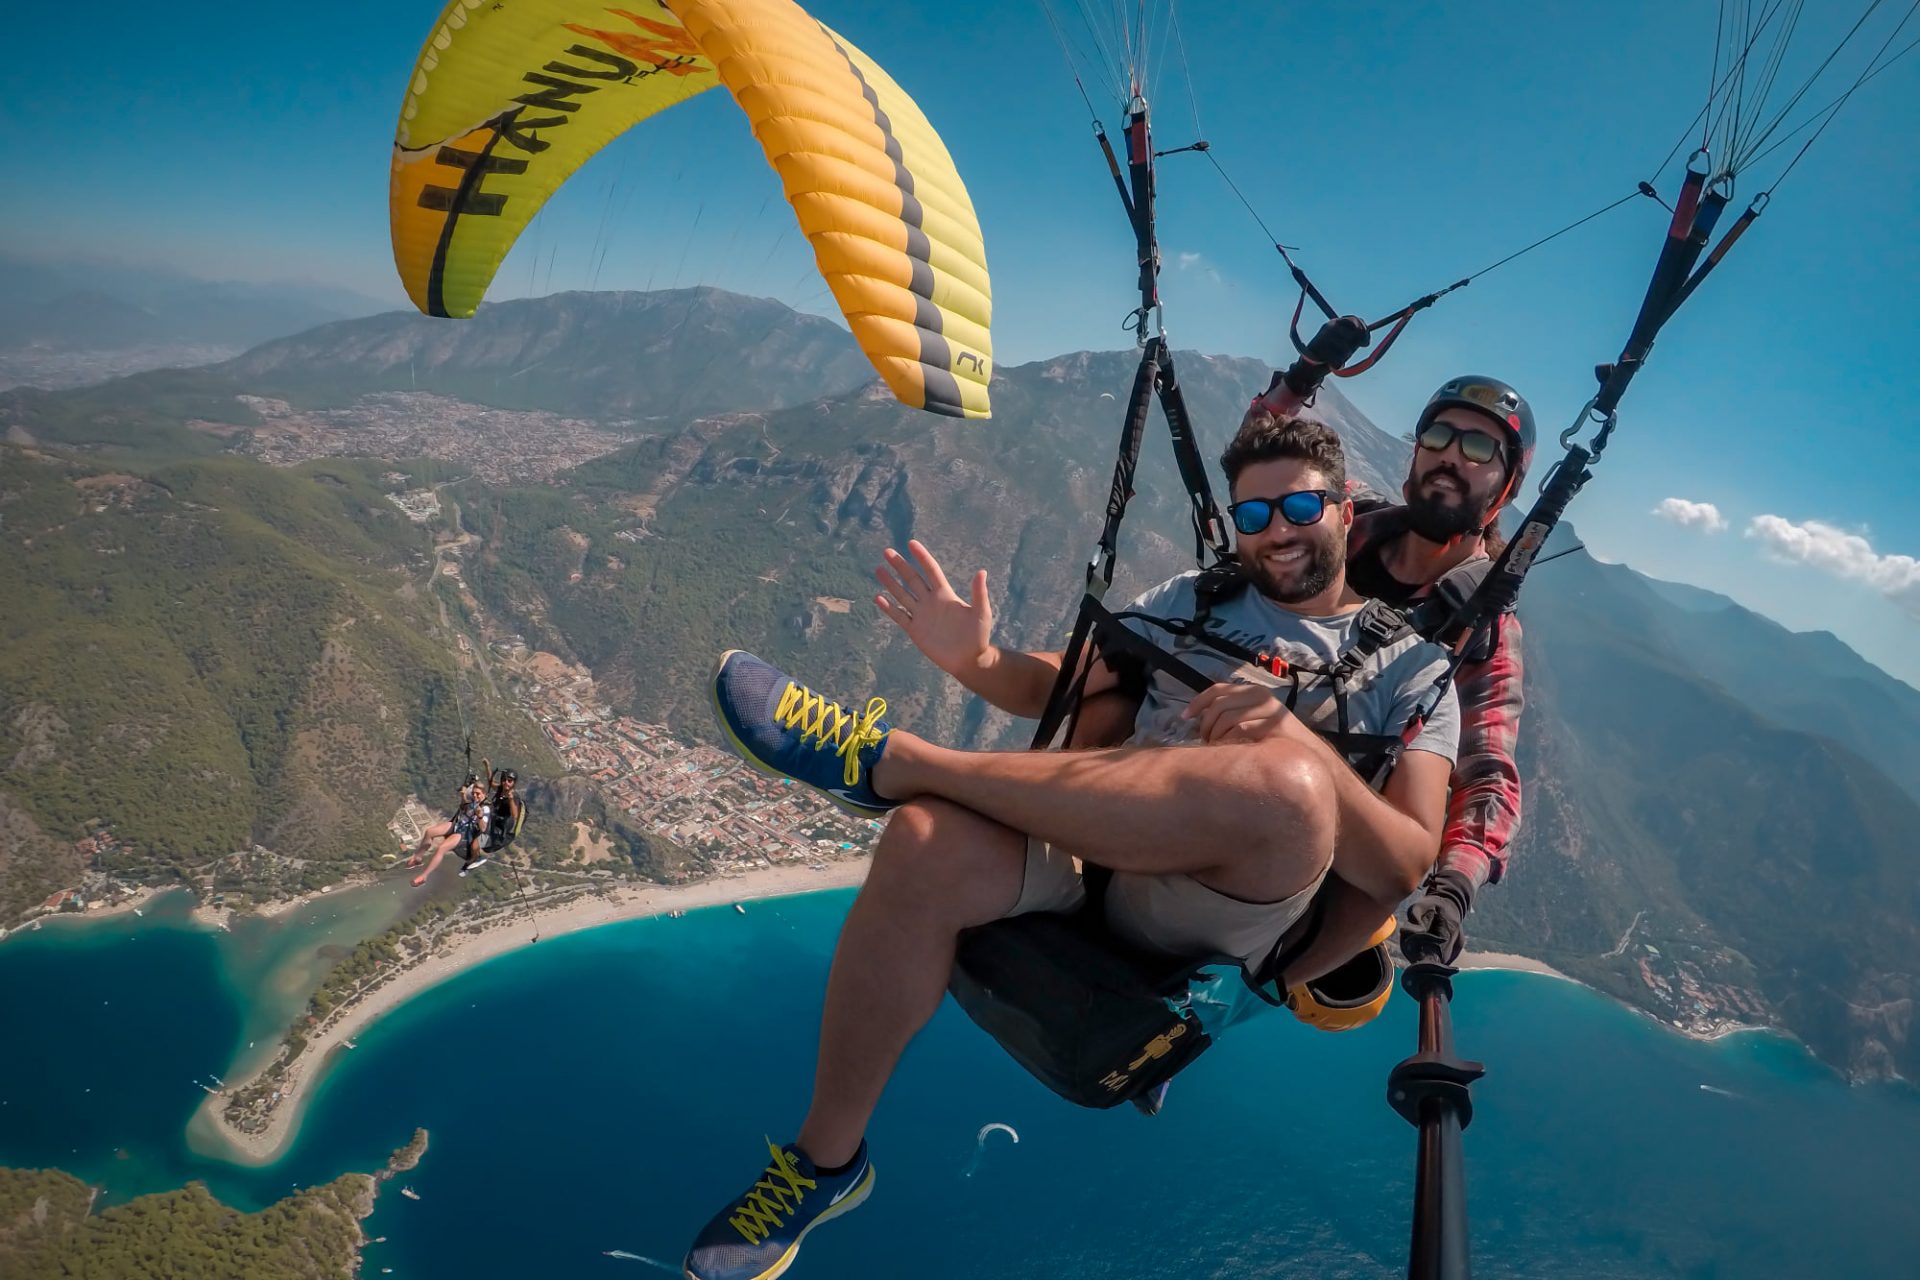 <p>Want to see Turkey from the sky? Then paragliding is your activity! You will start at the top of Mount Bagdad and, from there, you will see the great contrast between the turquoise waters and the green mountains.</p> <p>Image: Facebook - Hanuman Paragliding</p>